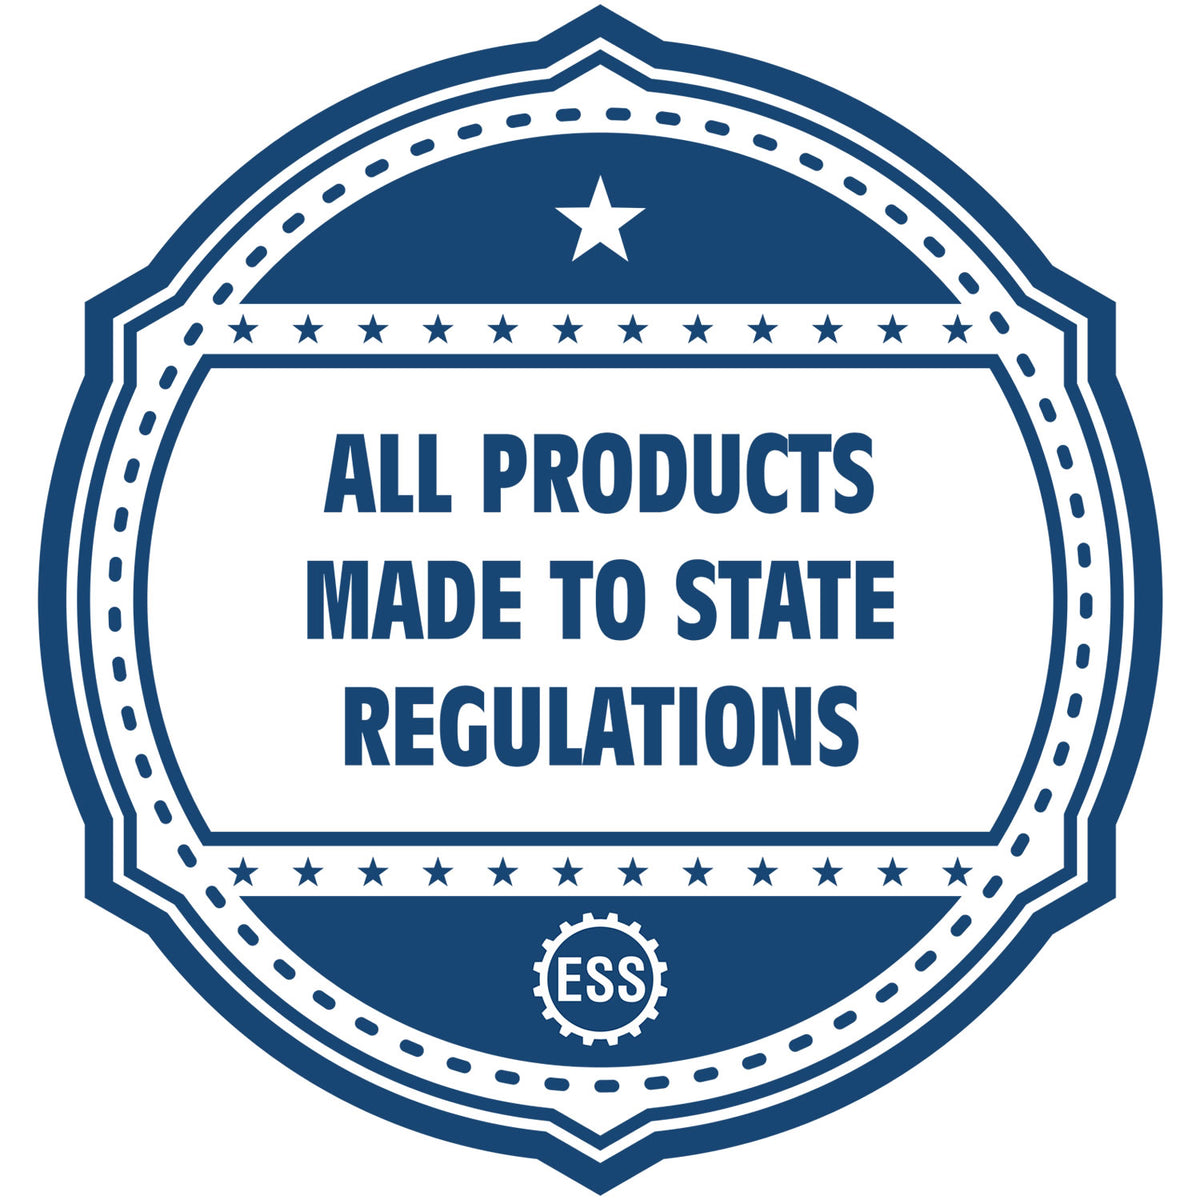 An icon or badge element for the Digital District of Columbia PE Stamp and Electronic Seal for District of Columbia Engineer showing that this product is made in compliance with state regulations.